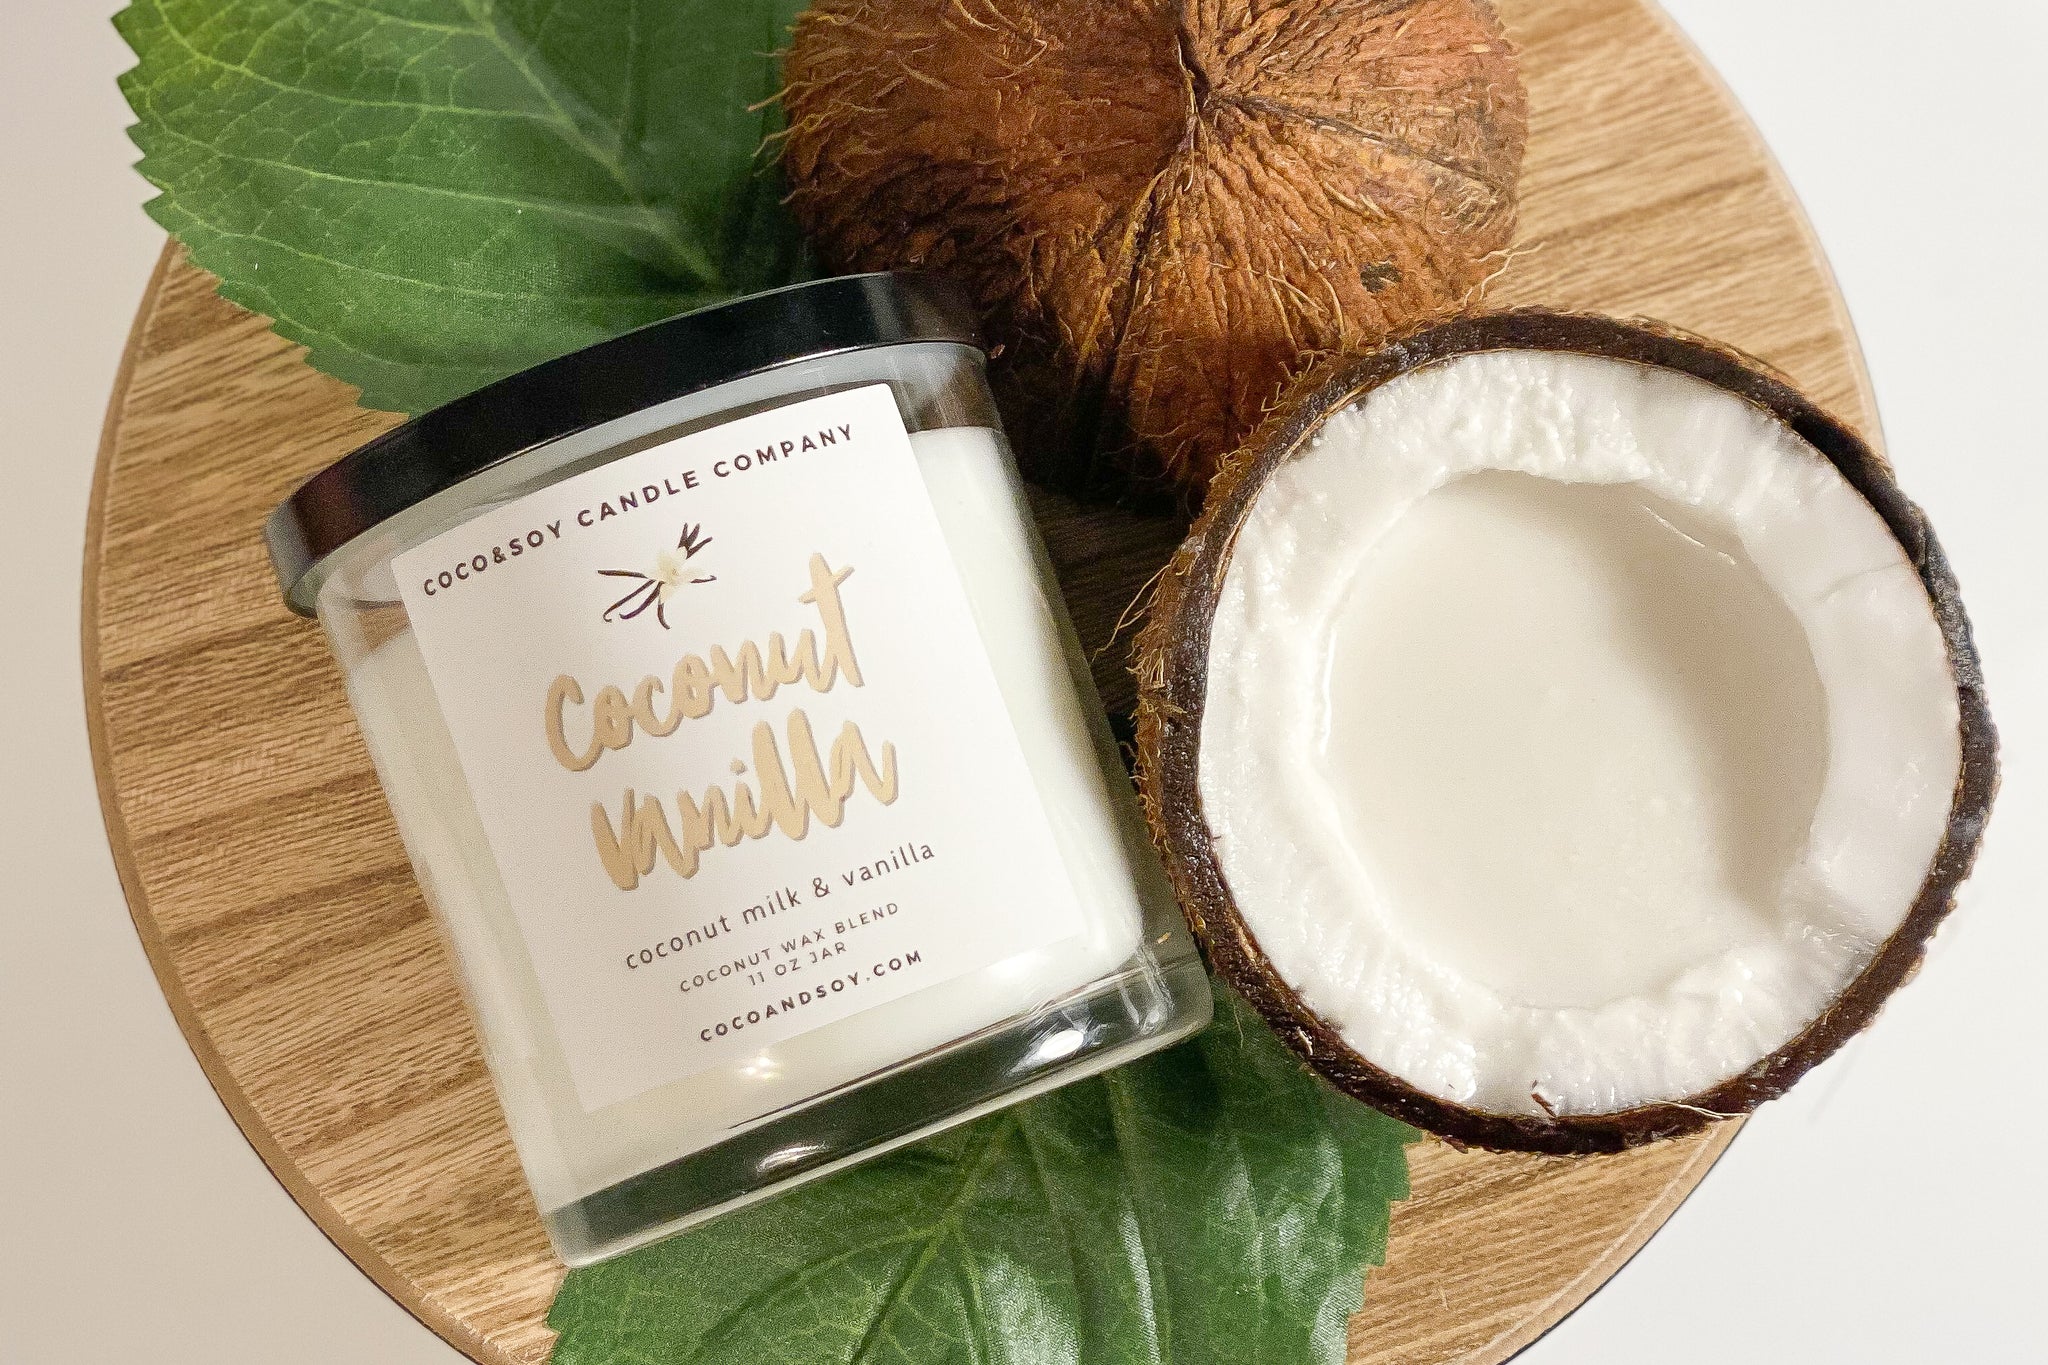 Coconut Vanilla Scented Candle - Coco&Soy – CocoandSoy Candle Company